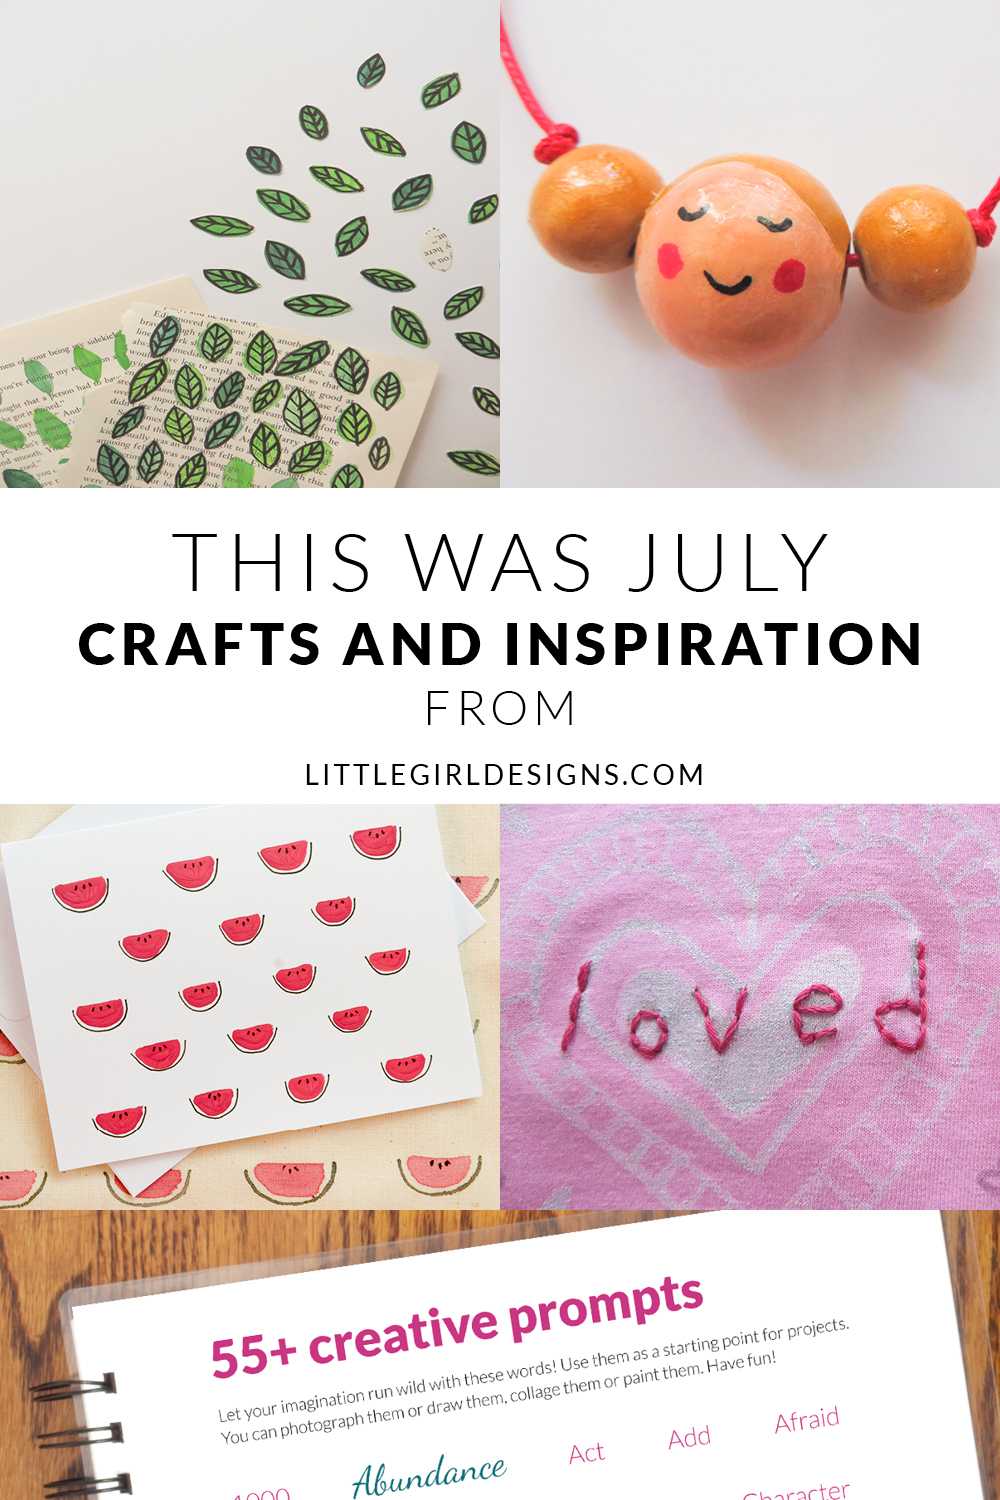 This Was July - A look back on July at Little Girl Designs. Learn to make watermelon notecards, a doll necklace, a cute t-shirt, and more! Plus free creative prompts! @ littlegirldesigns.com